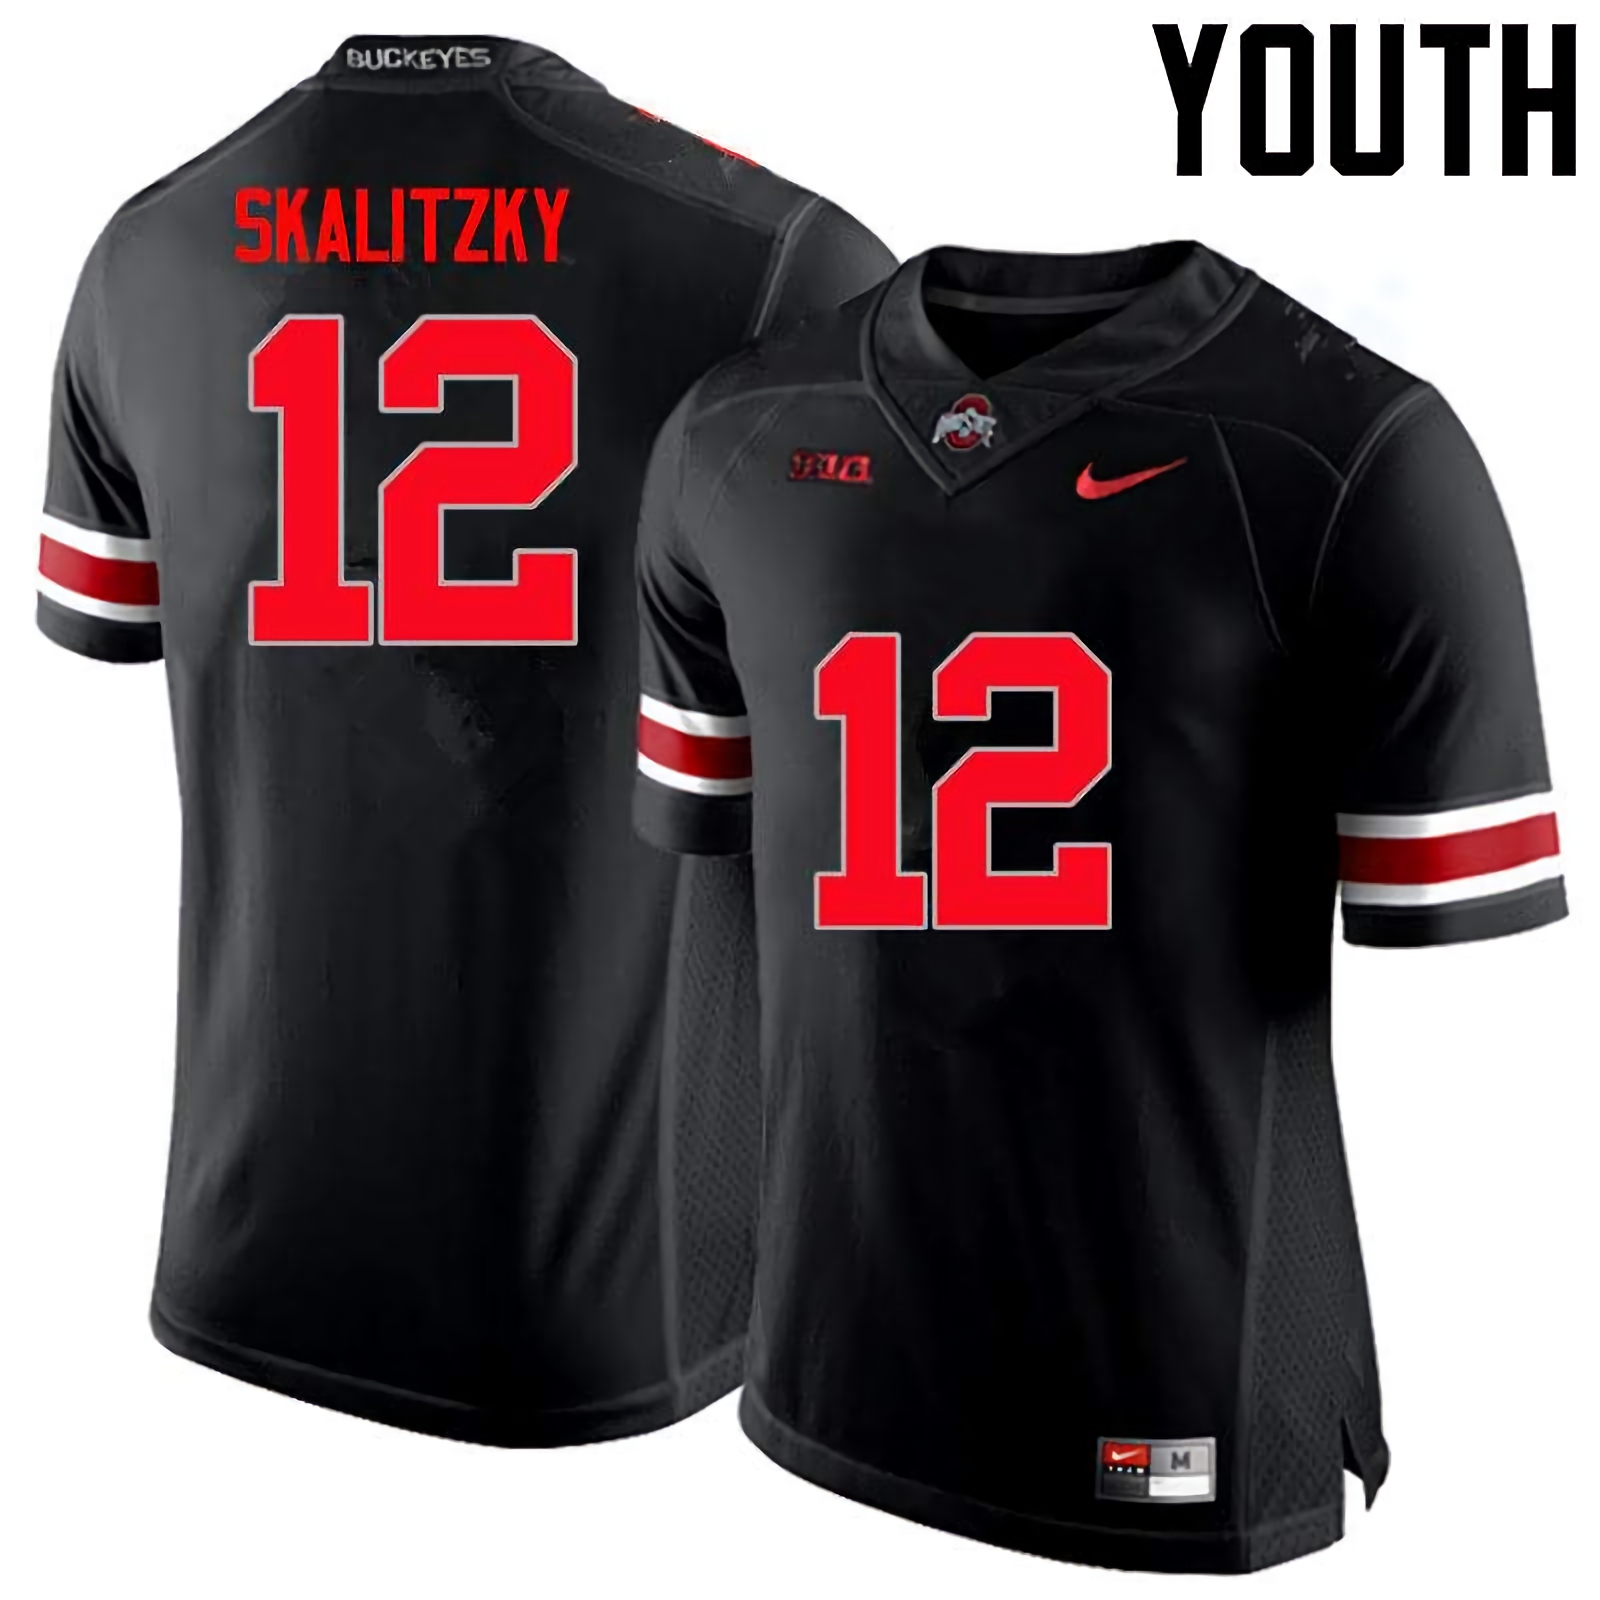 Brendan Skalitzky Ohio State Buckeyes Youth NCAA #12 Nike Black Limited College Stitched Football Jersey YRH8456NP